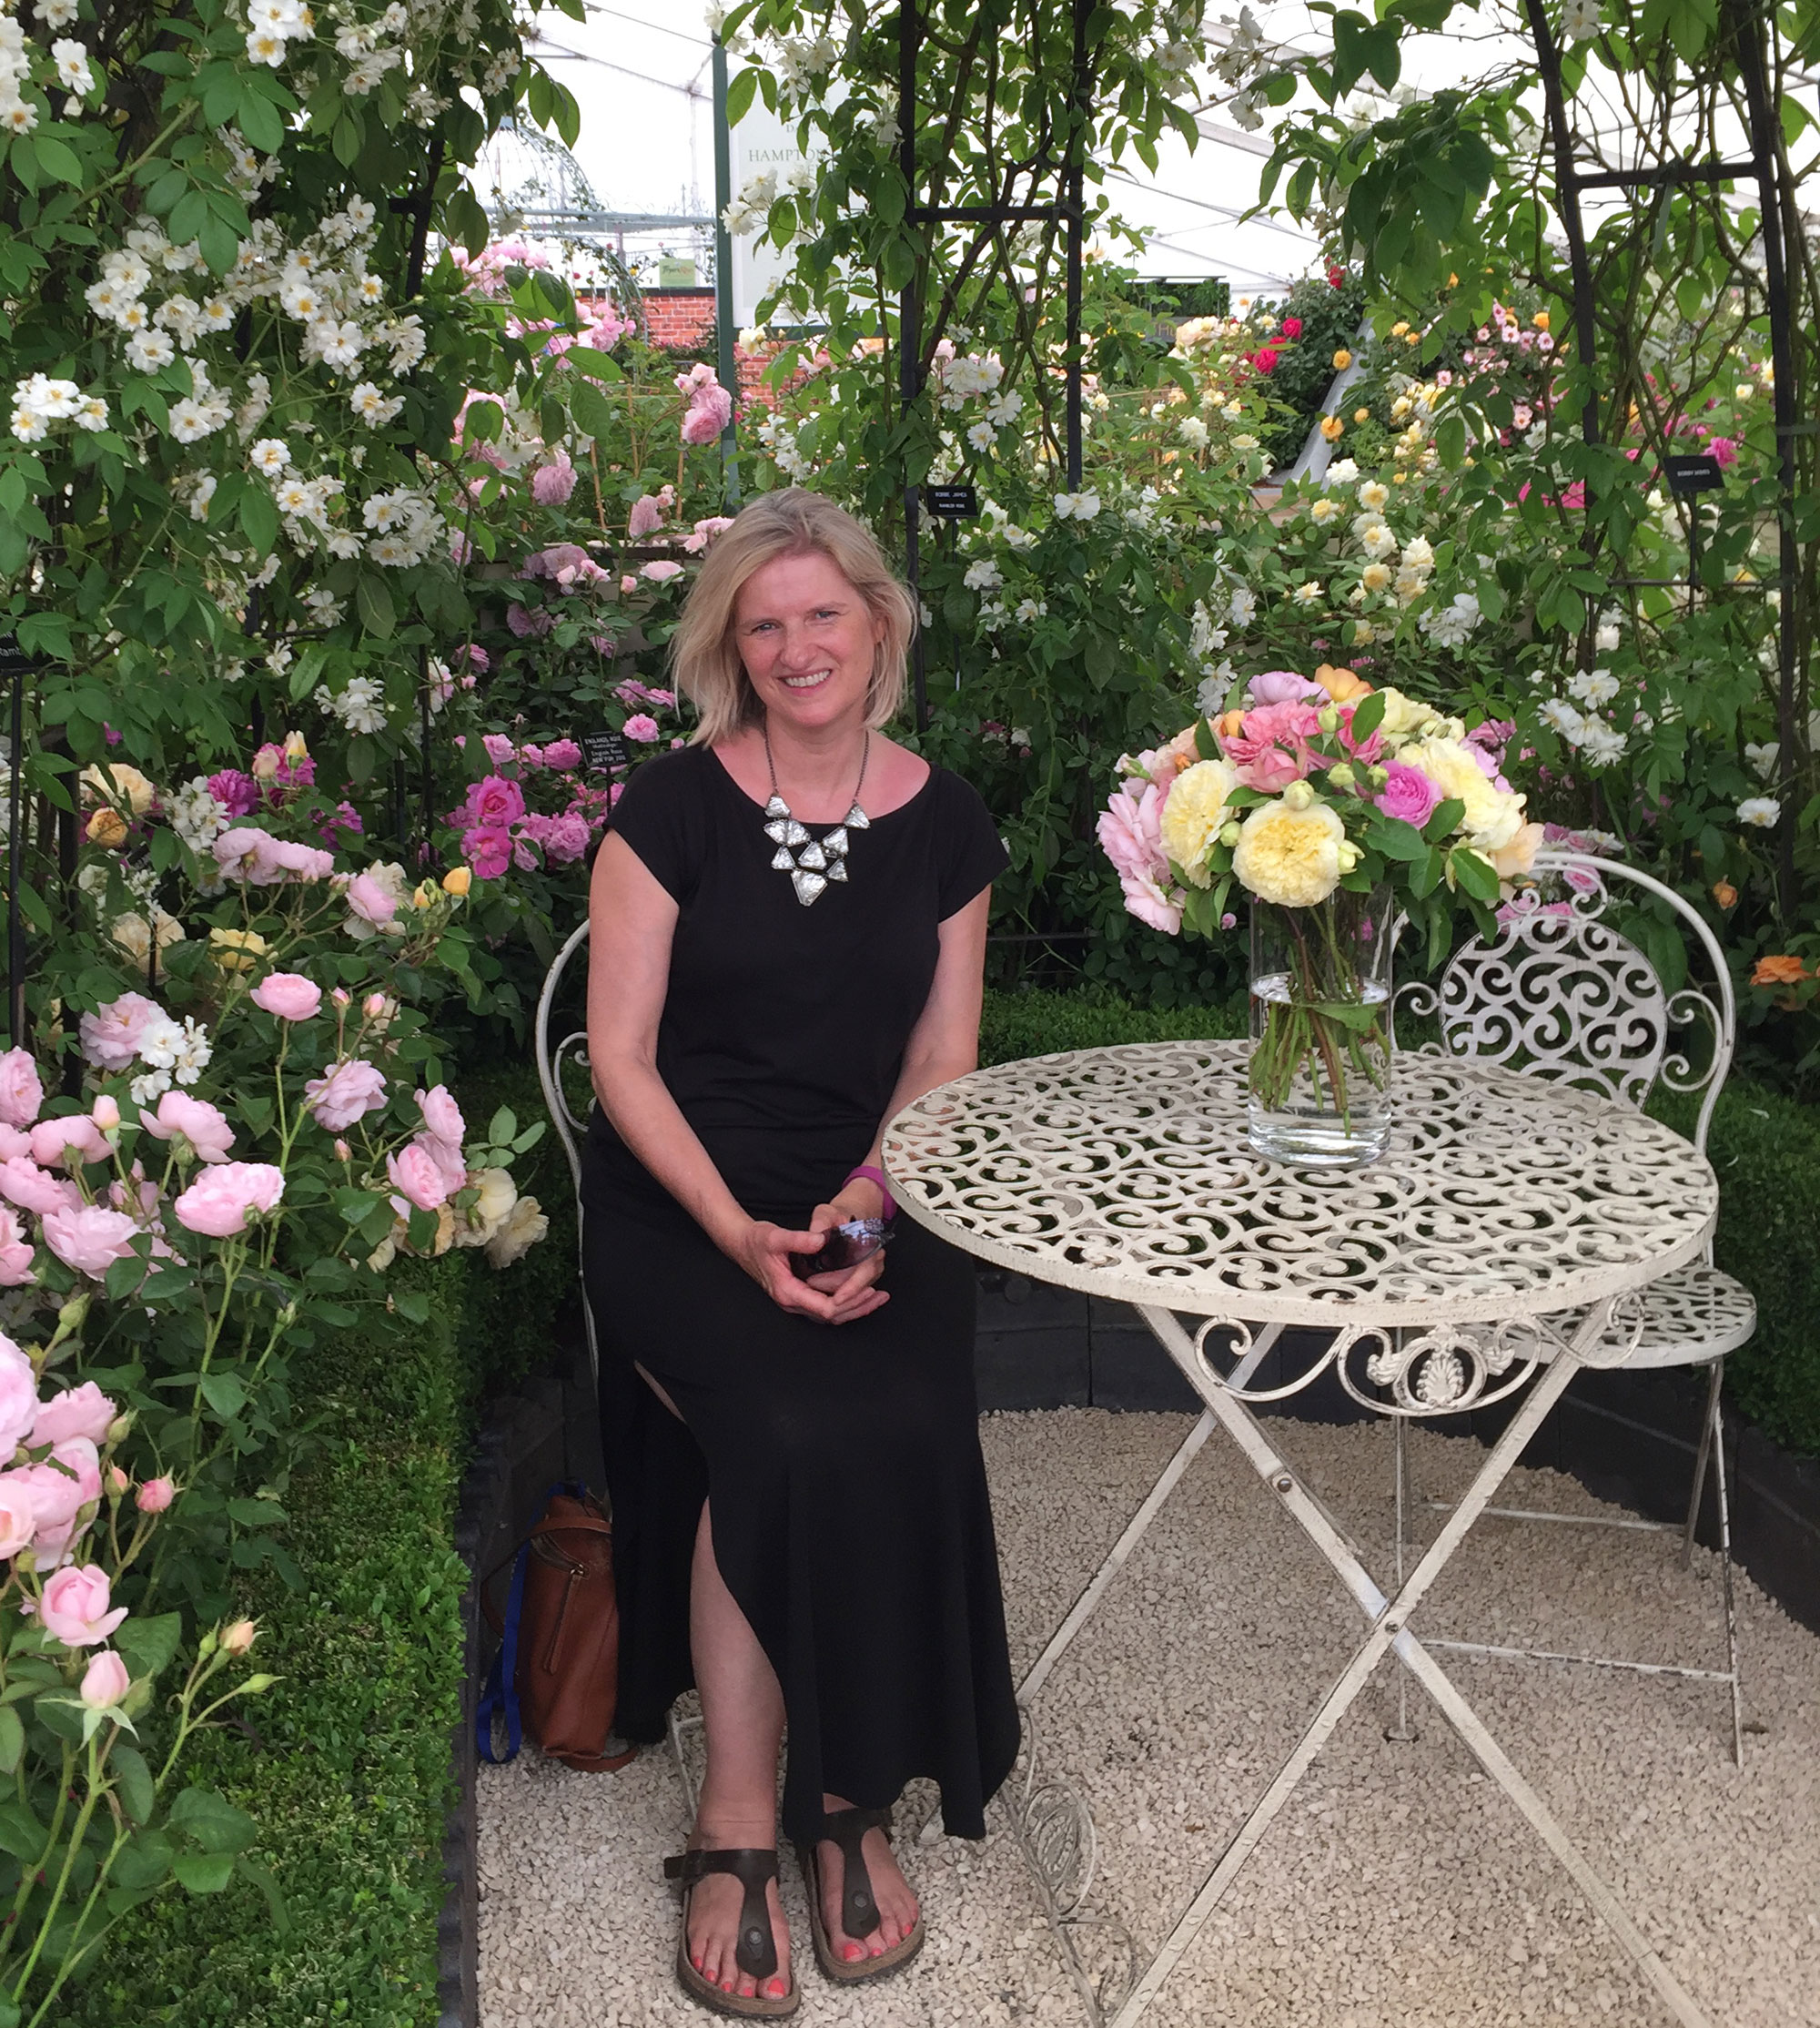 photo of Karen Darlow at Hampton Court flower show with roses and cast iron table